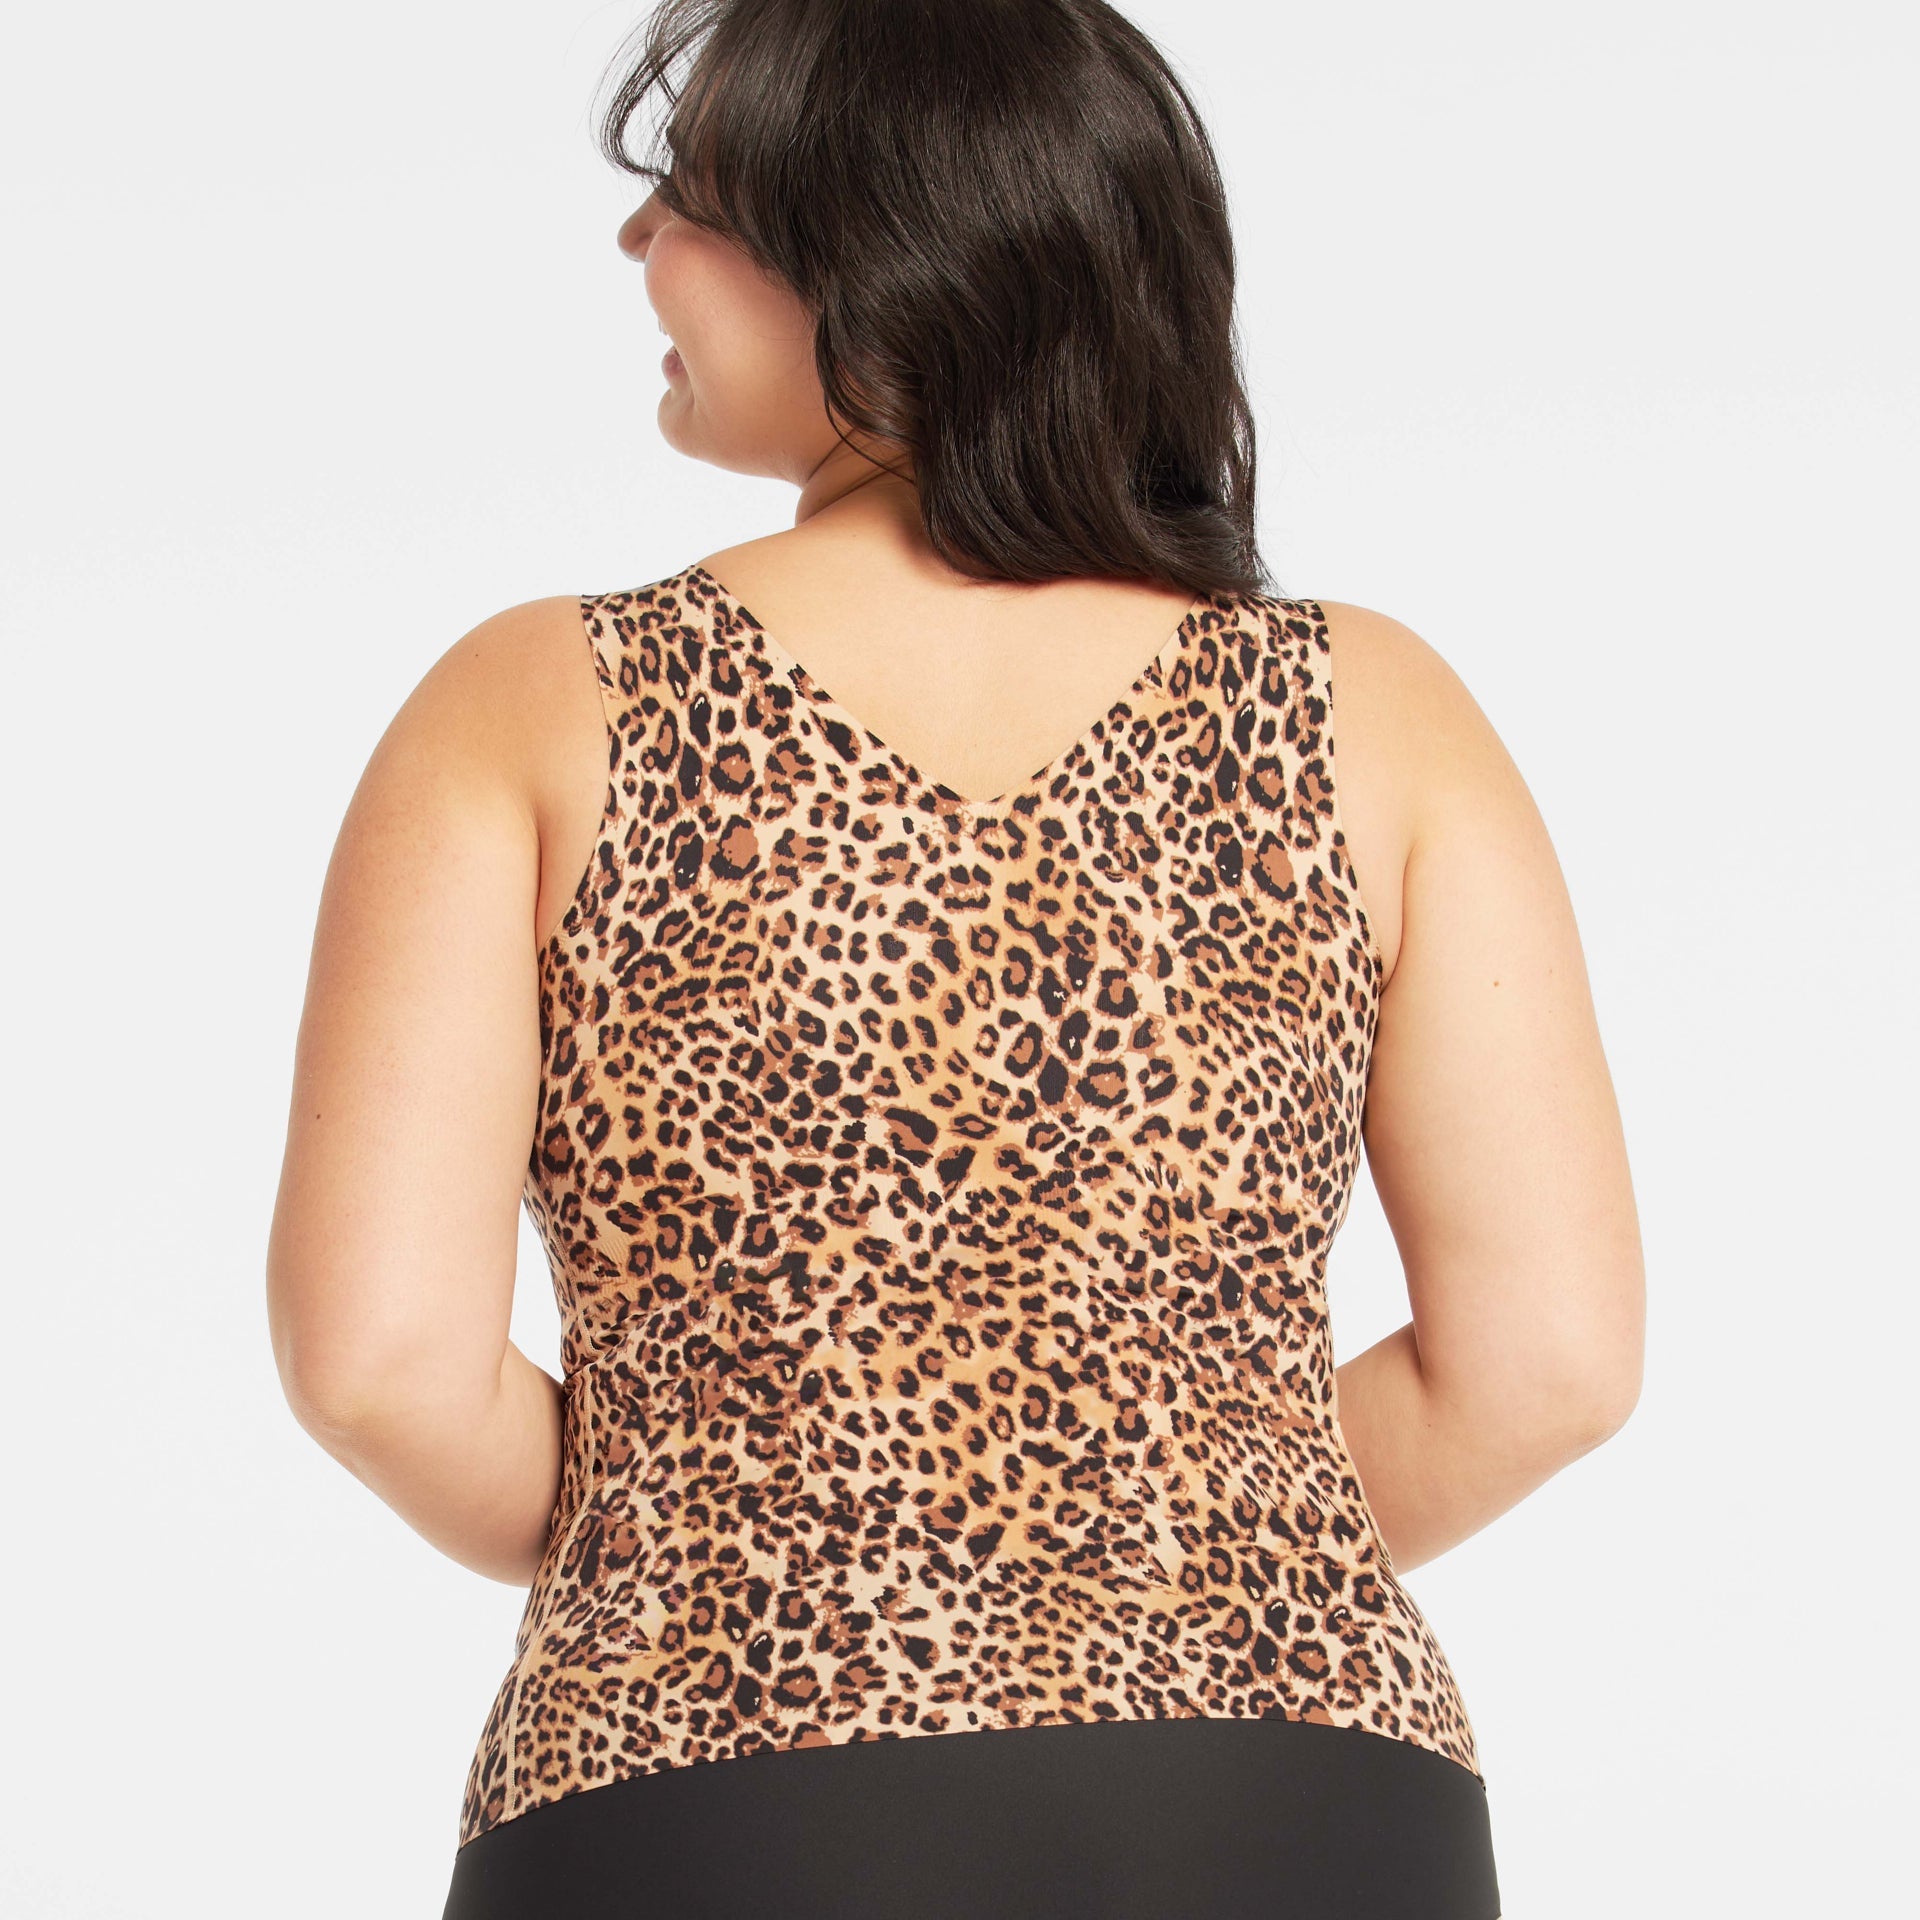 All Color: Leopard | built in support tank